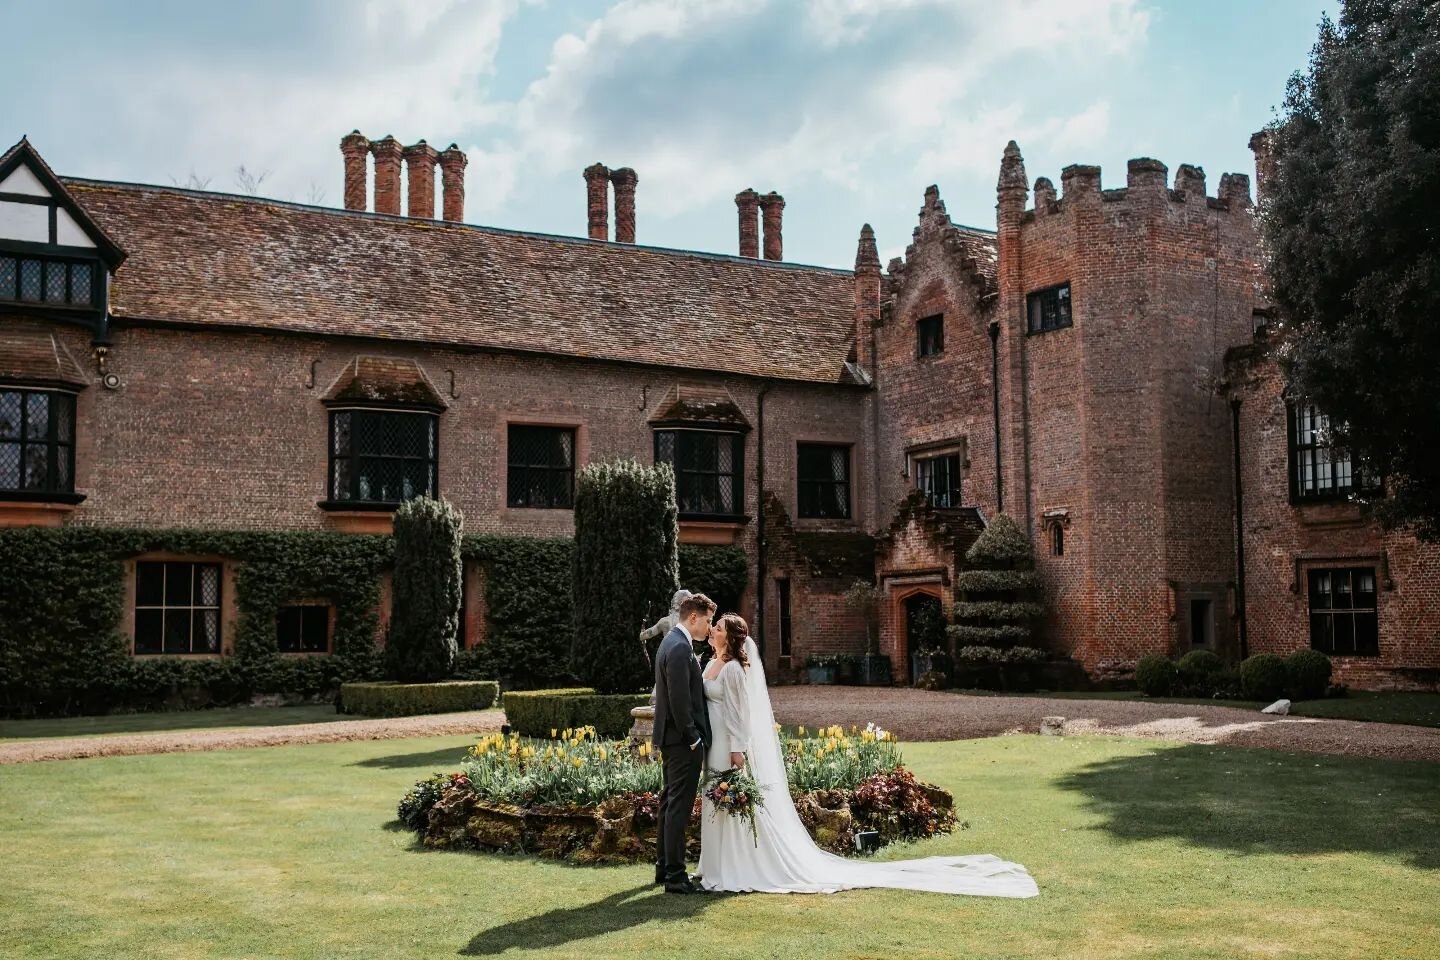 Let's talk about how special yesterday was The utterly gorgeous Jessica &amp; Jack tied the knot at the stunning @cheniesmanorweddingsandevents

Video @jason_lynch_weddings